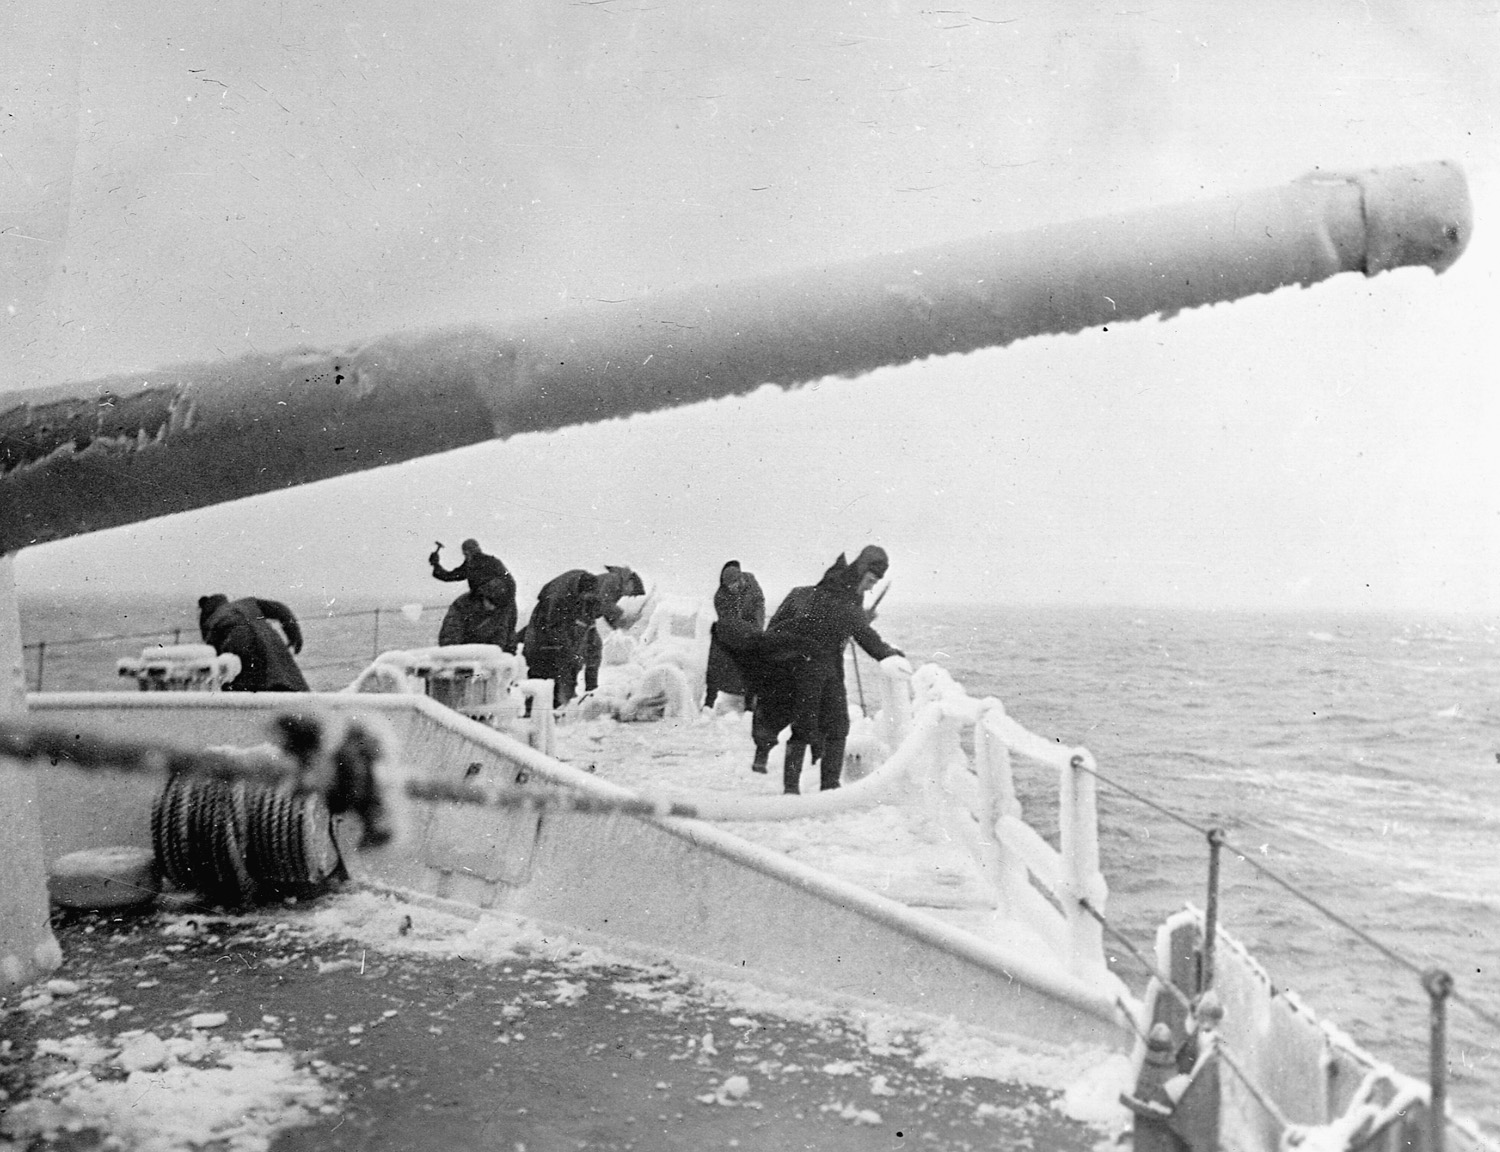 Crew members attempt to clear the ice from the frozen deck of their destroyer.